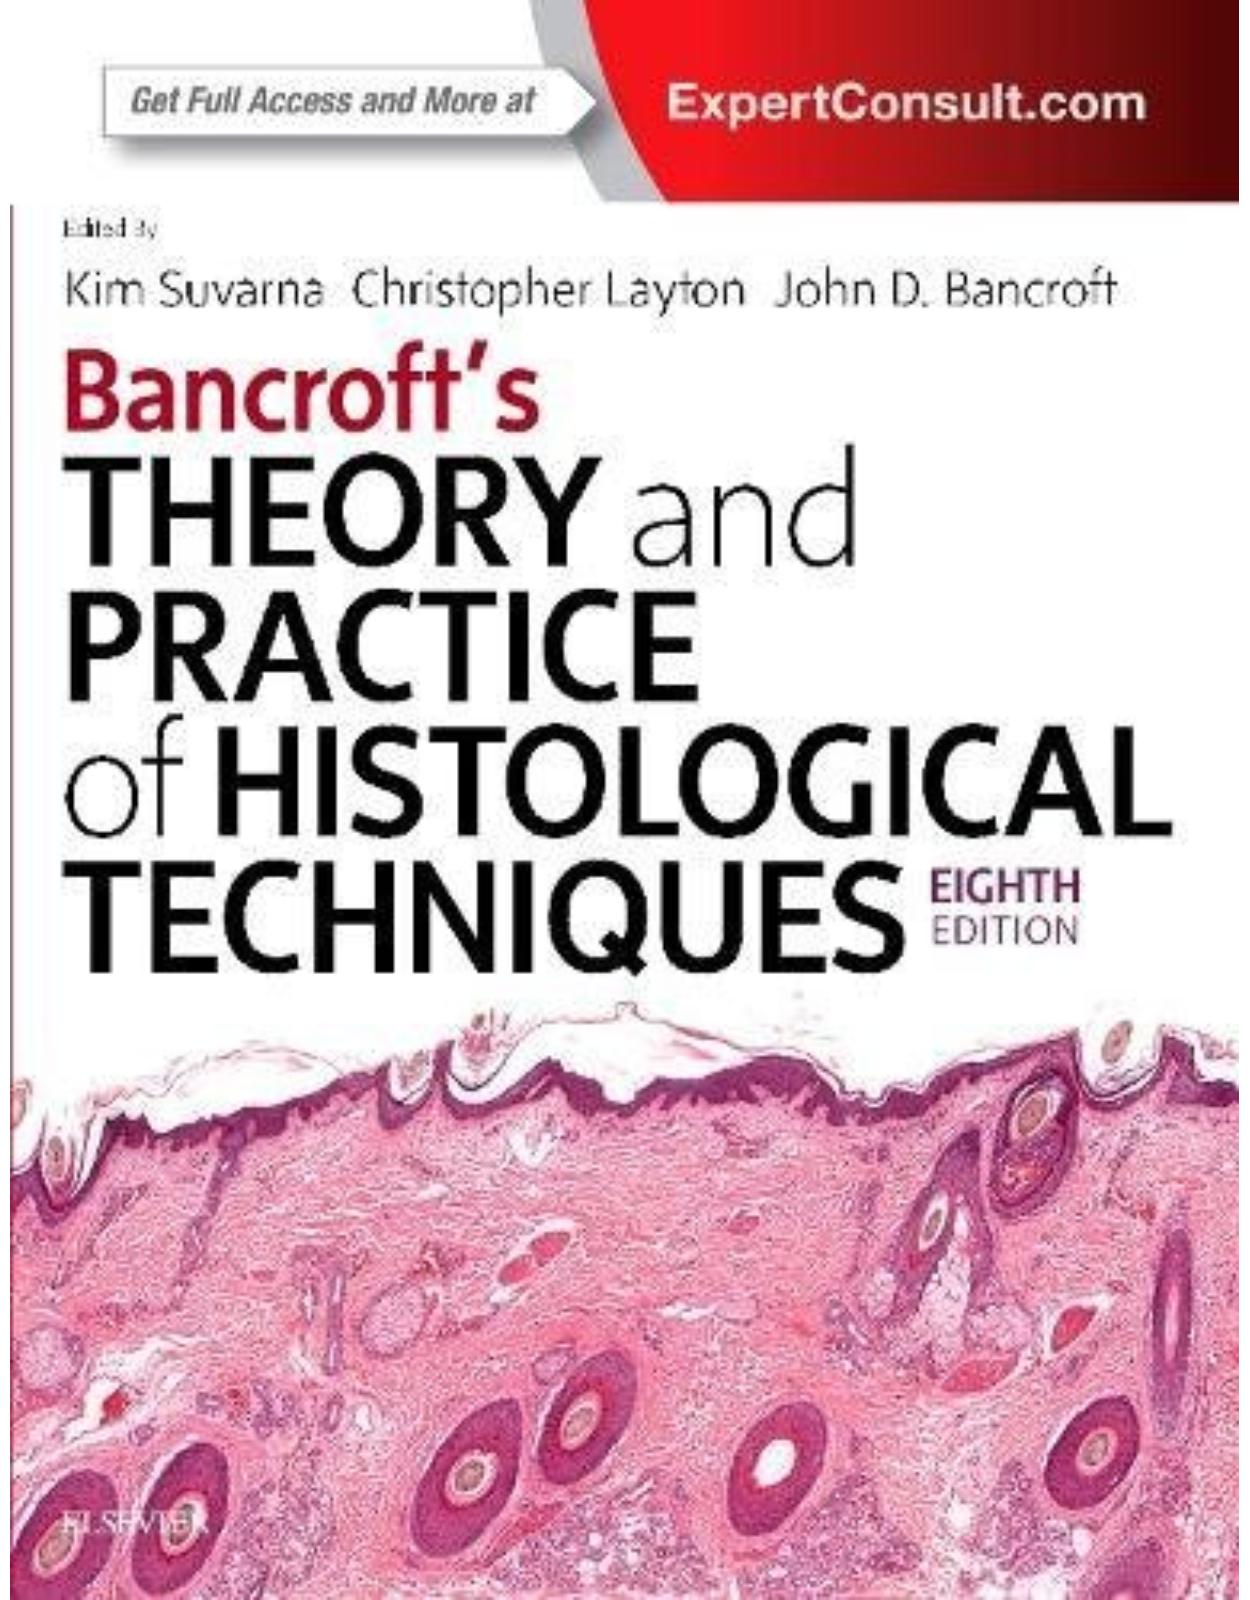 Bancroft’s Theory and Practice of Histological Techniques, 8th Edition